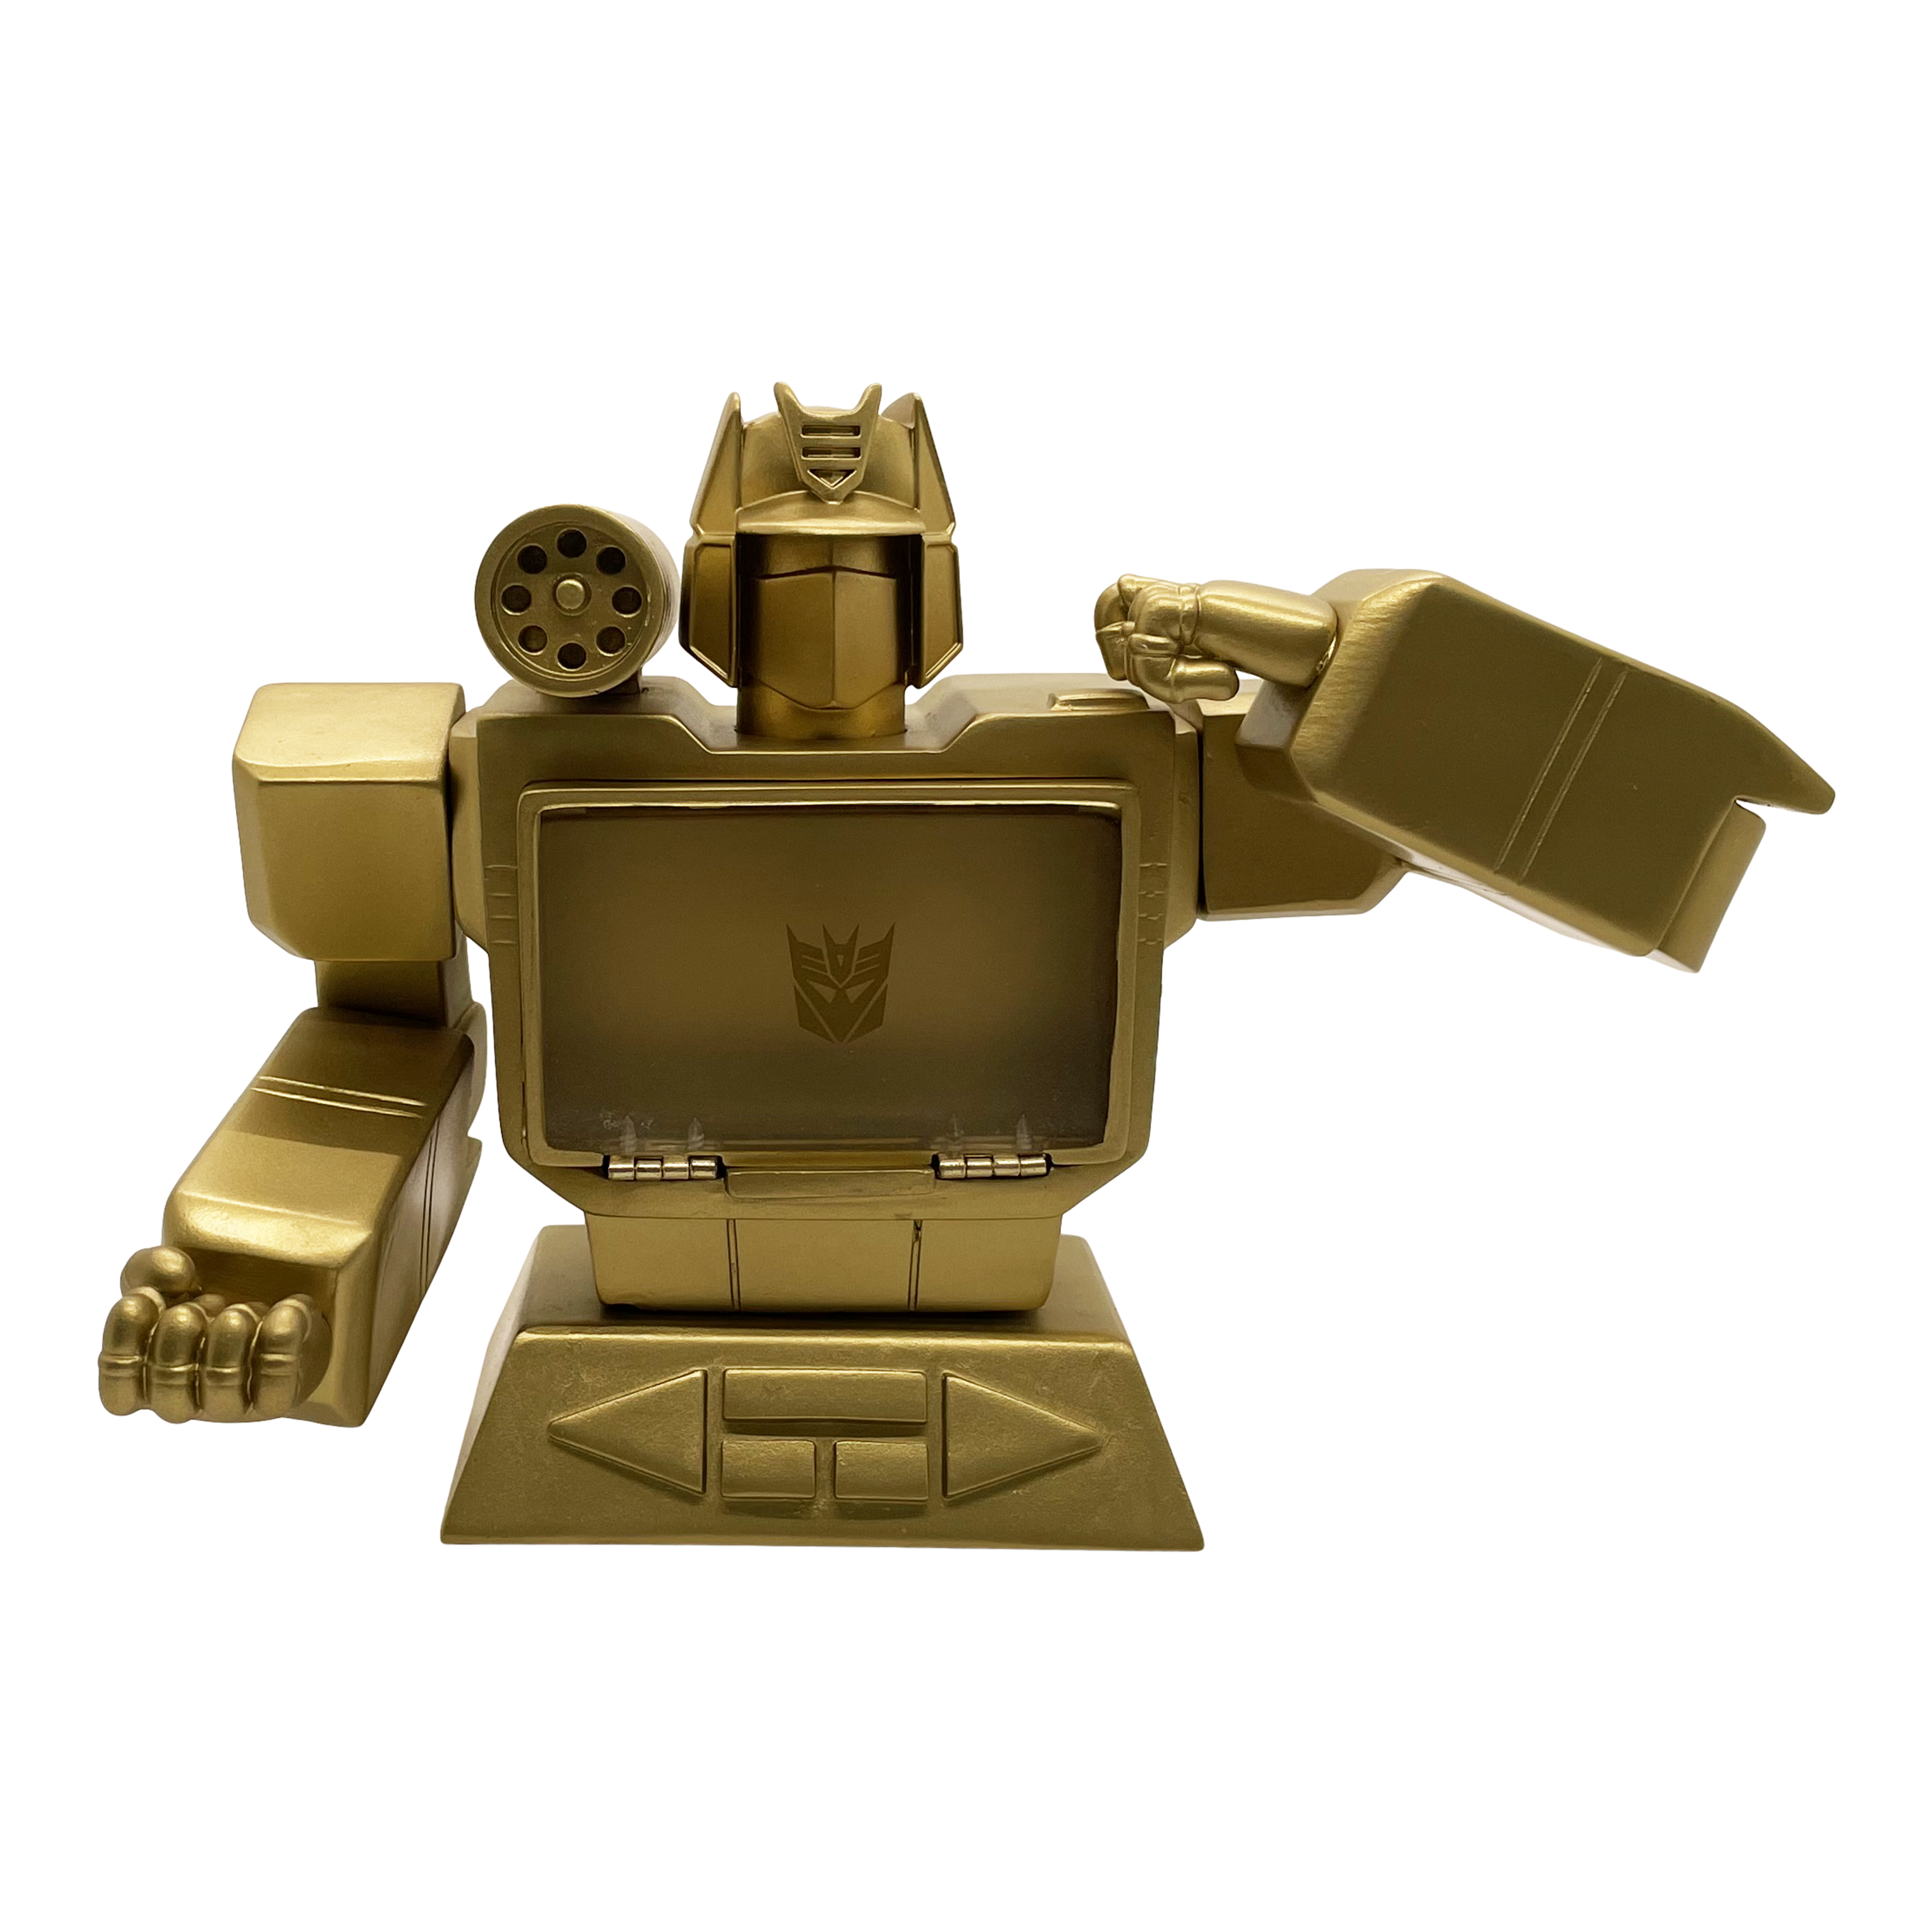 Transformers Soundwave Mini Bust Card Holder (Golden Lagoon Excl